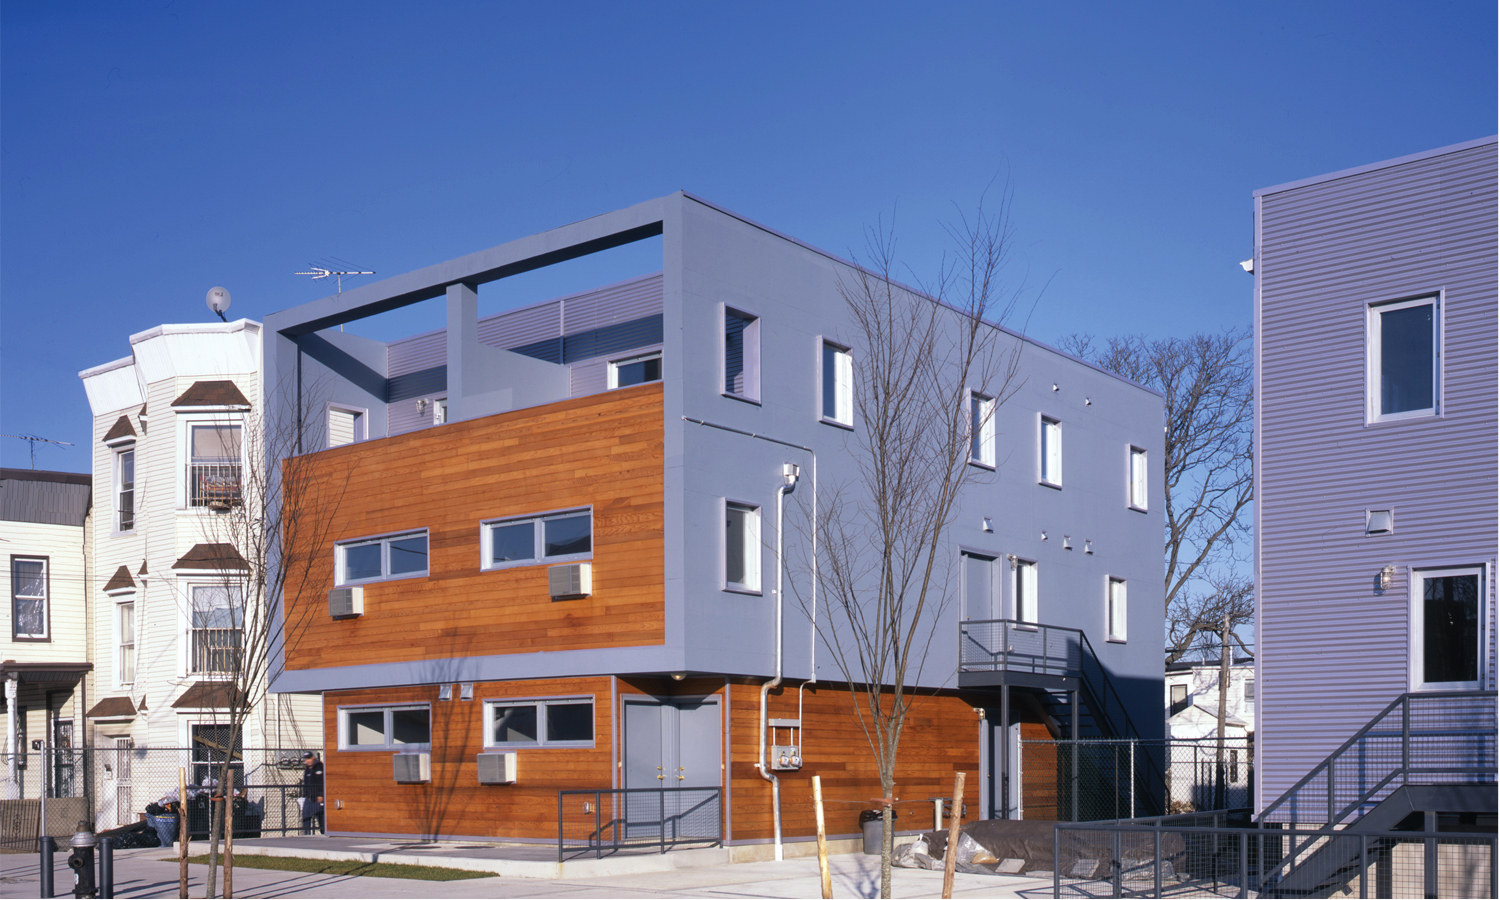 Homes at Glenmore Gardens in East New York, built in 2007 through Bloomberg's New Foundations program. photo via LTL Architects